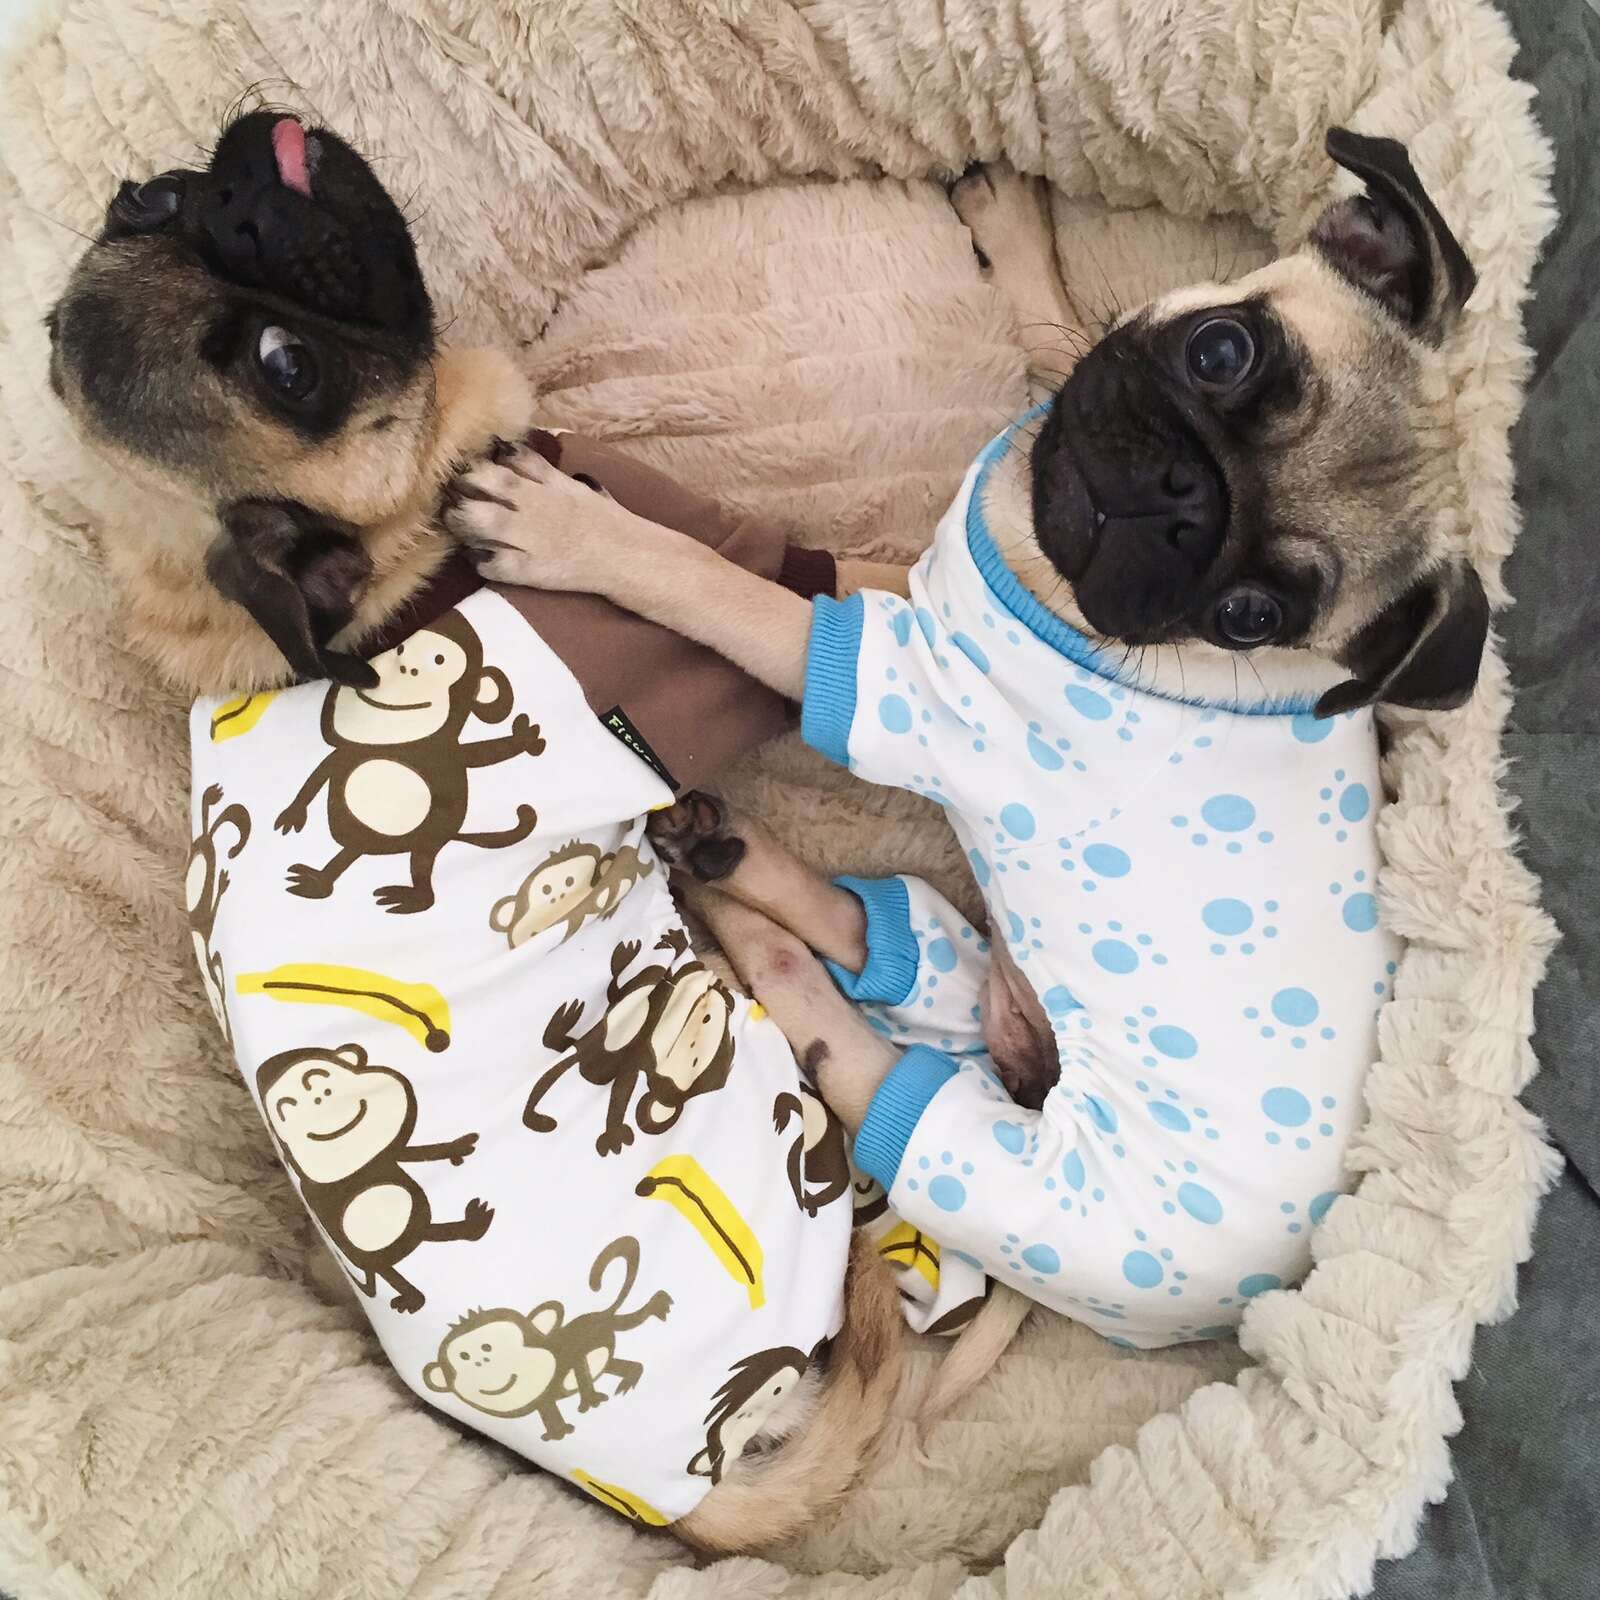 Two pugs in pajamas in dog bed